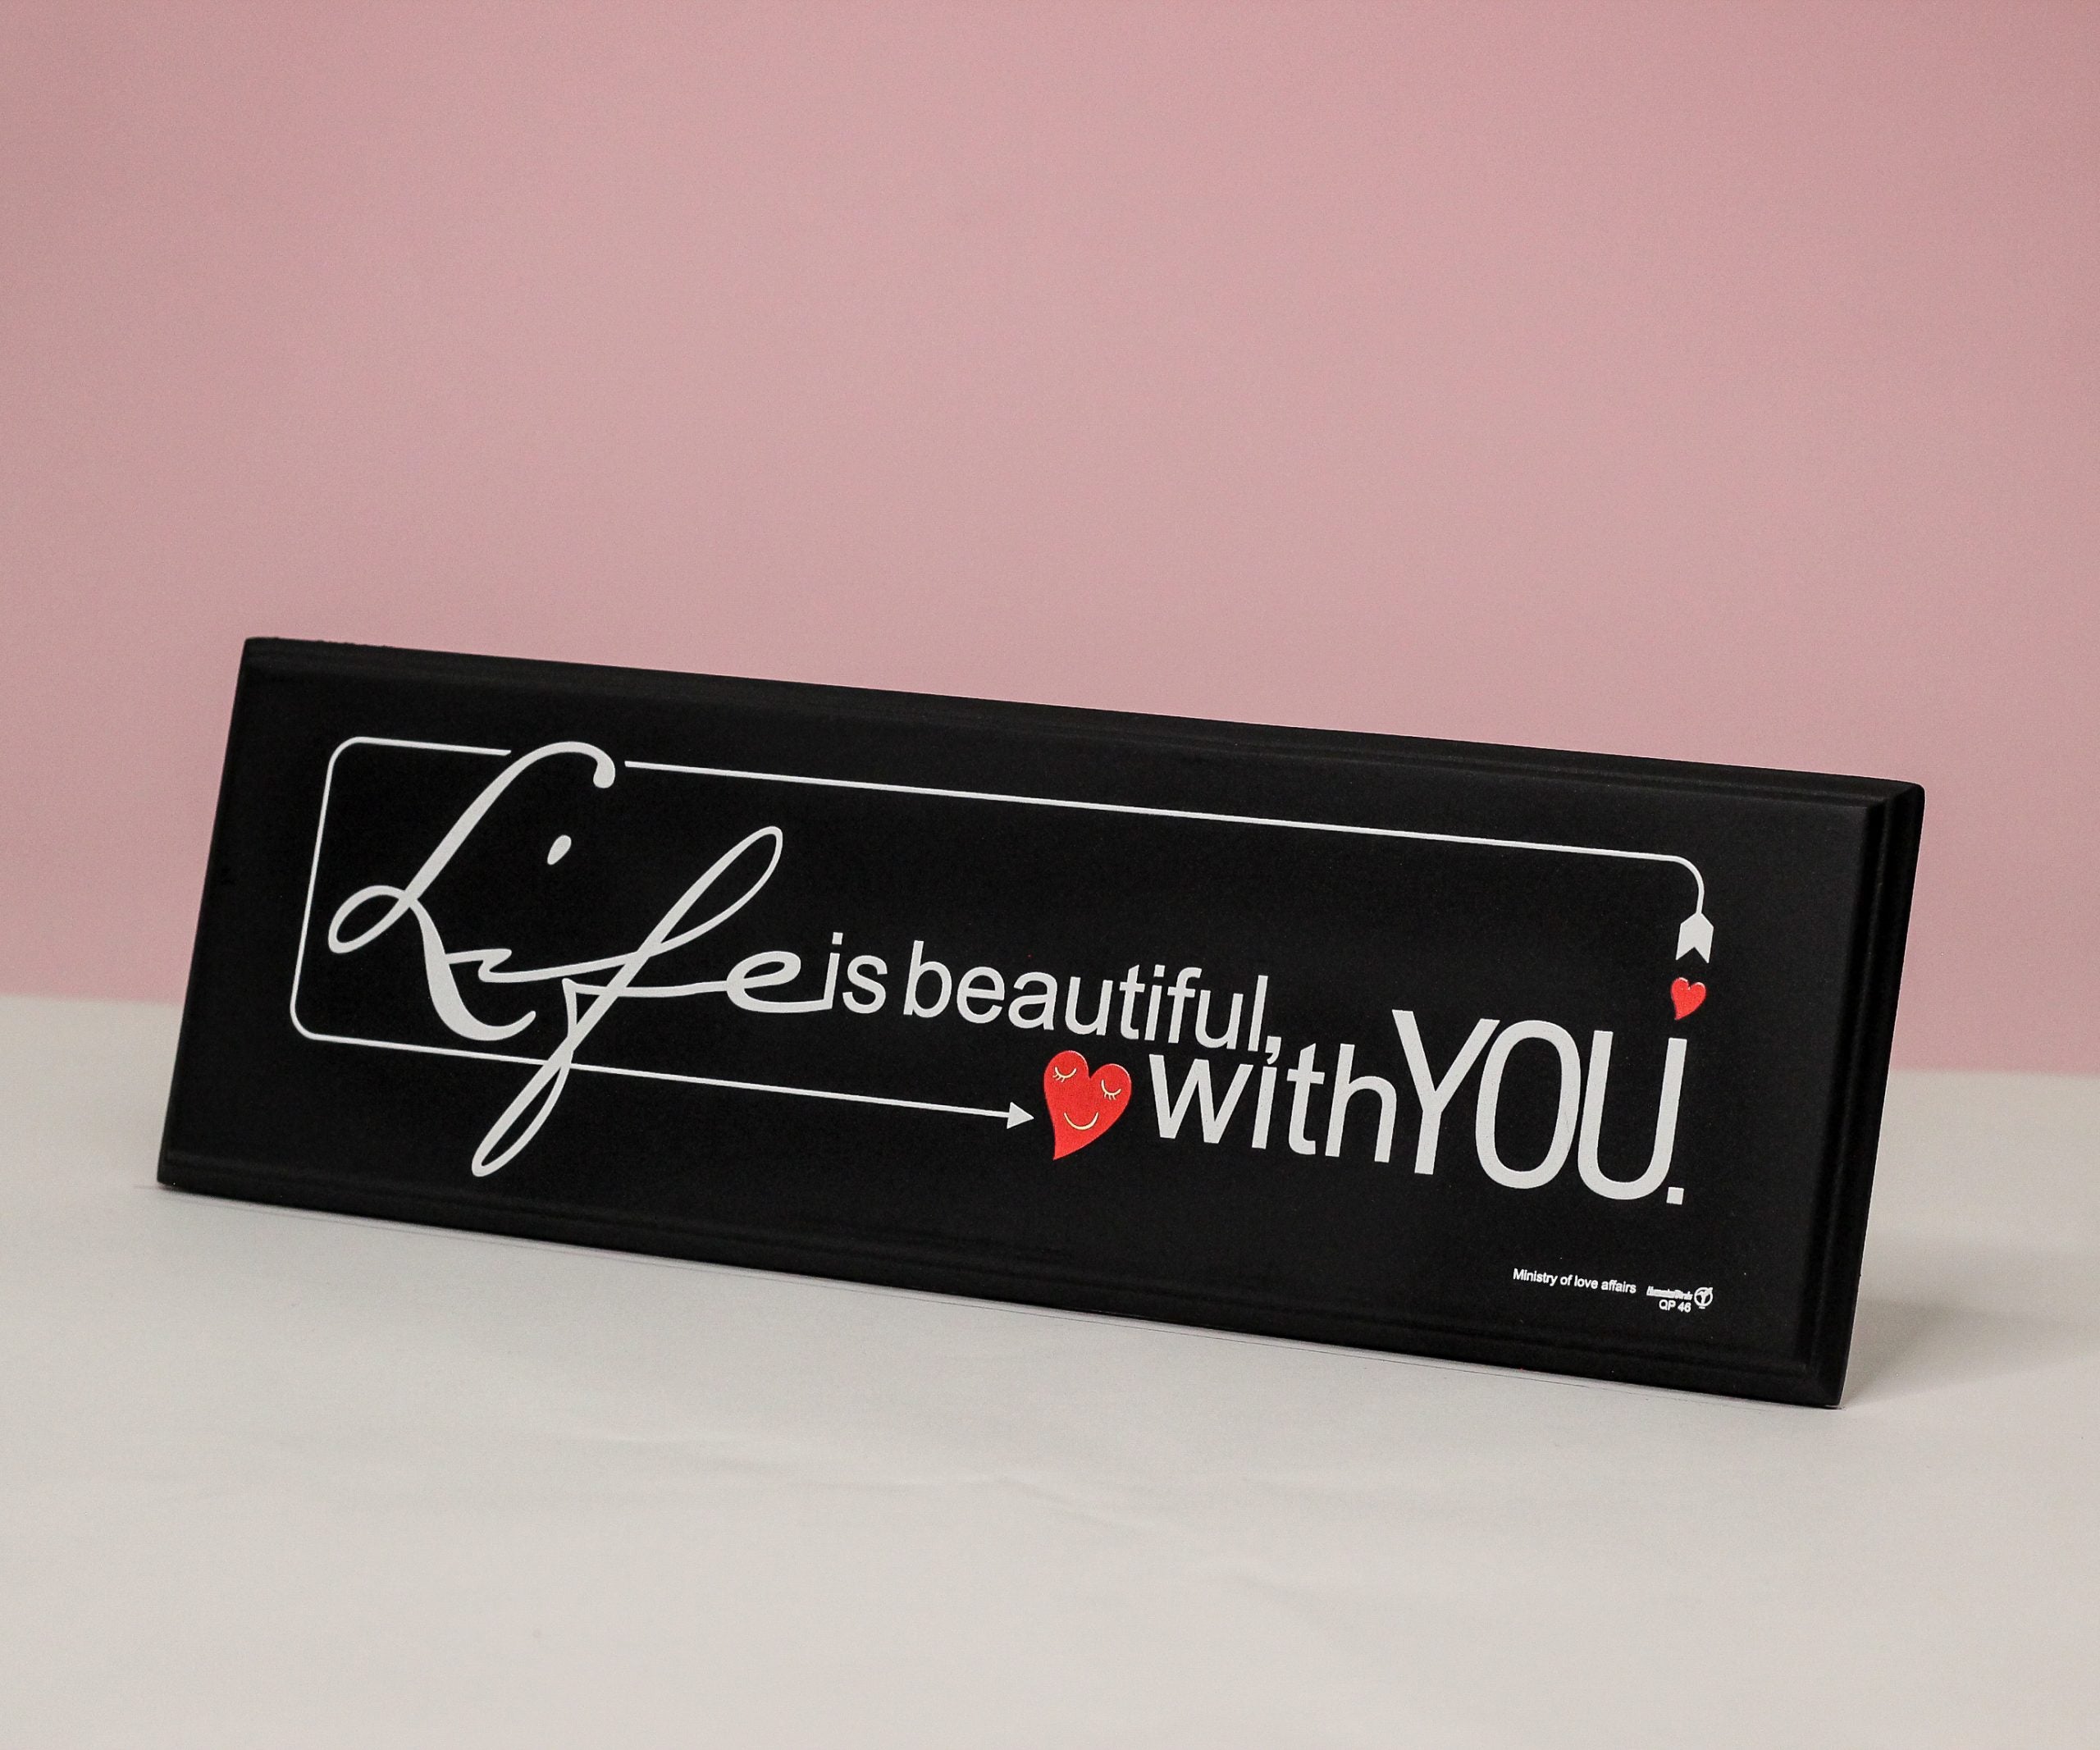 LIFE IS BEAUTIFUL WITH YOU QP46 QUOTATION PLATE